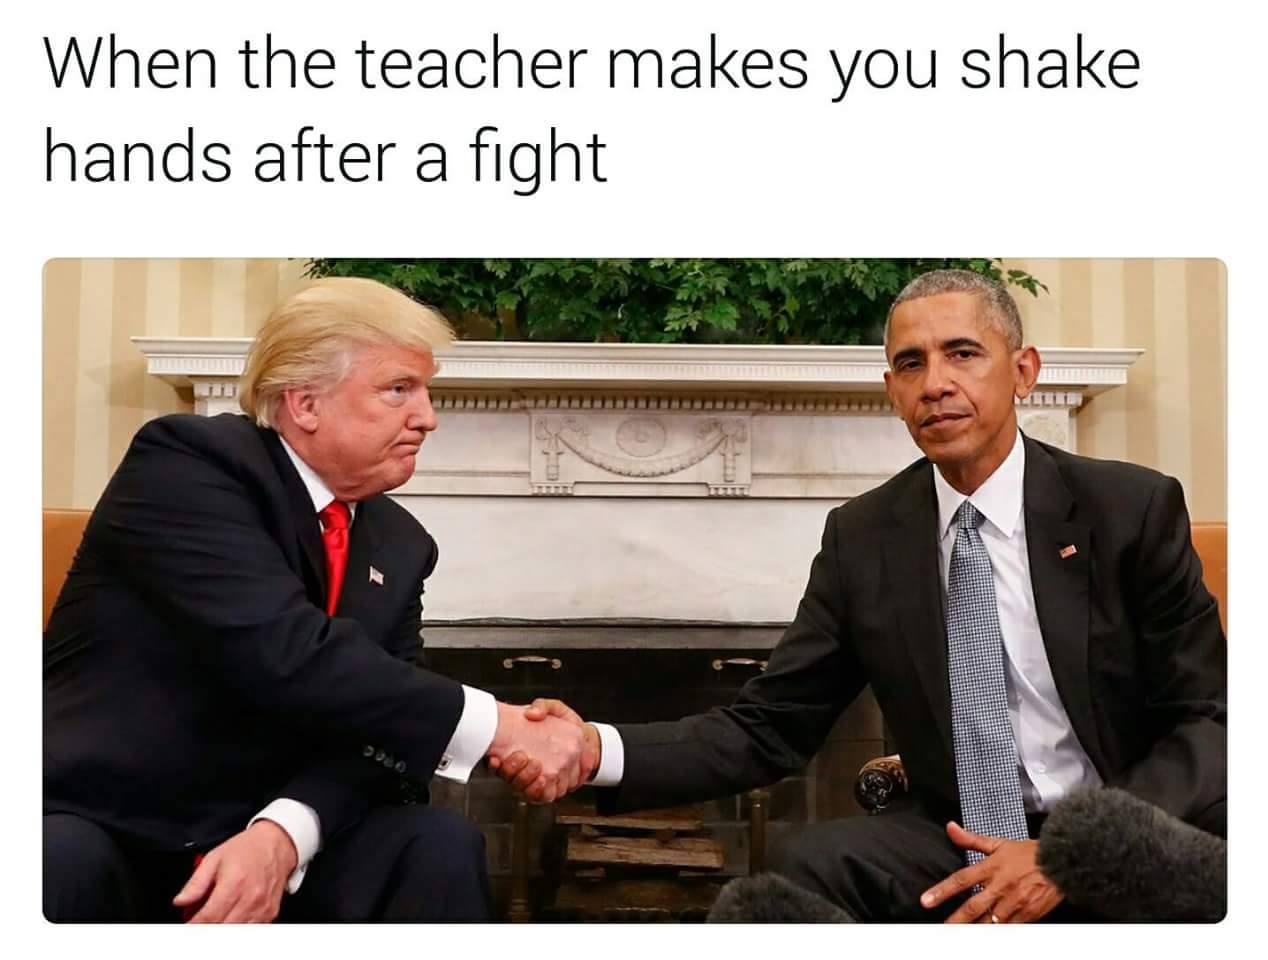 obama and trump shaking hands - When the teacher makes you shake hands after a fight